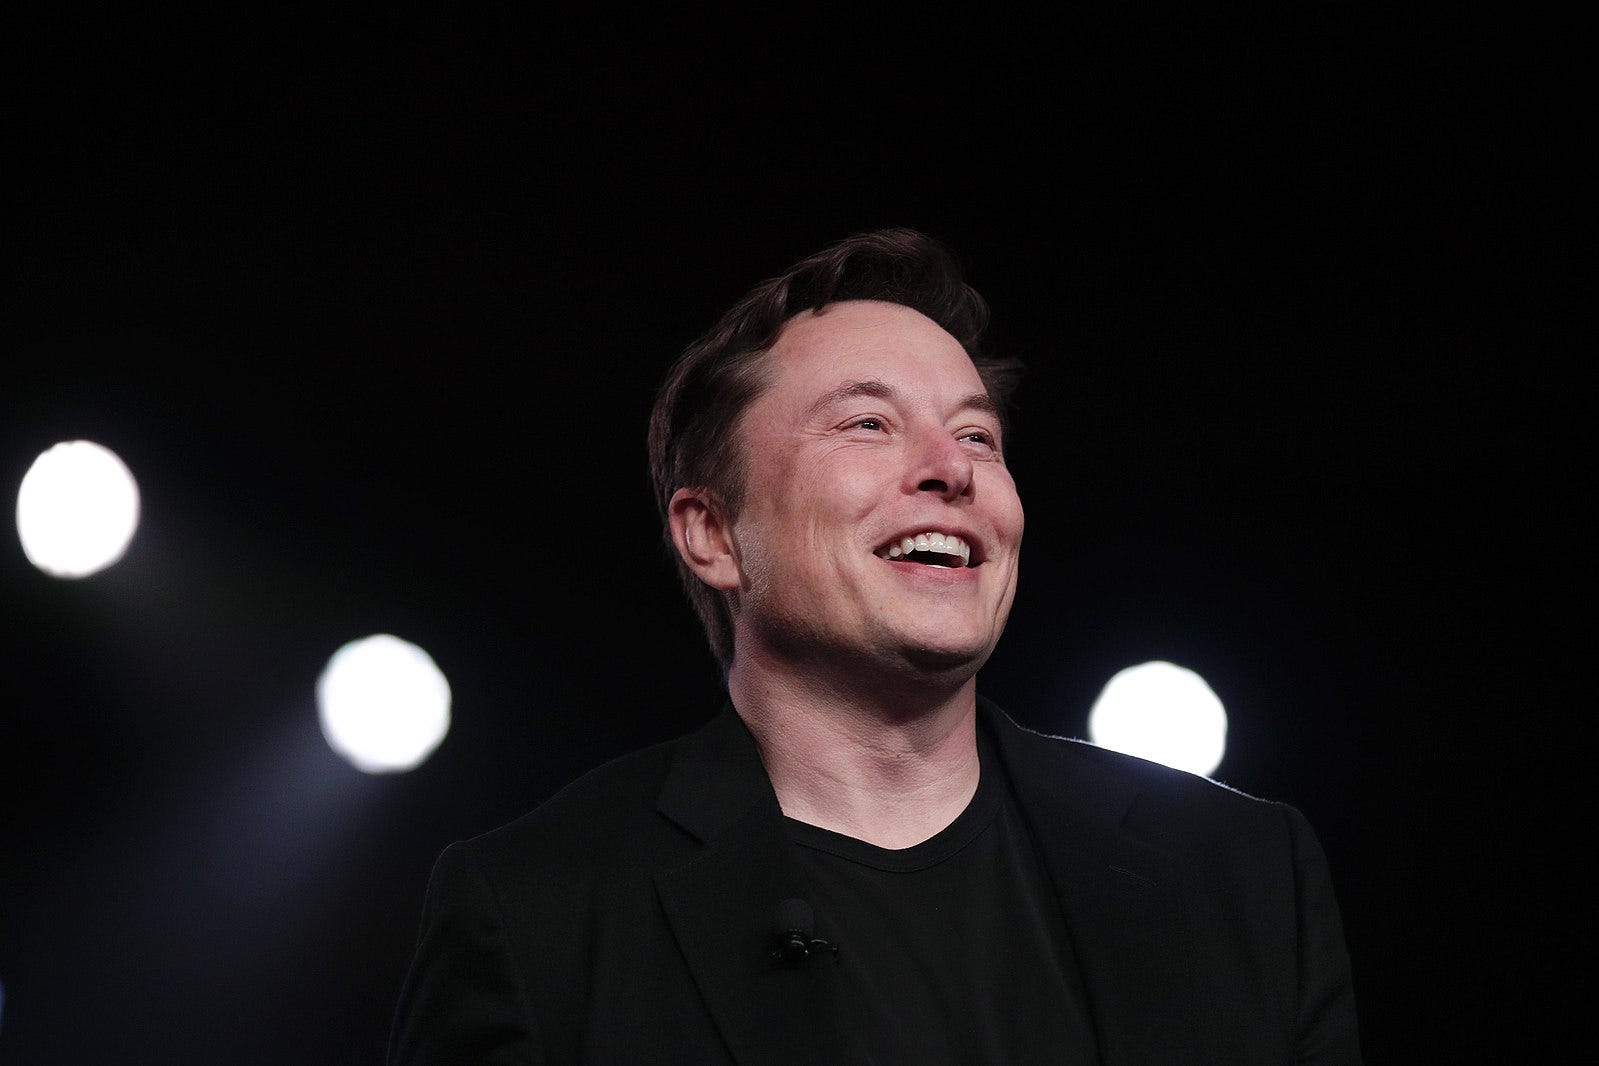 Elon Musk Curious If Converting Tesla's Balance Sheet To Bitcoin Is 'Even Possible'